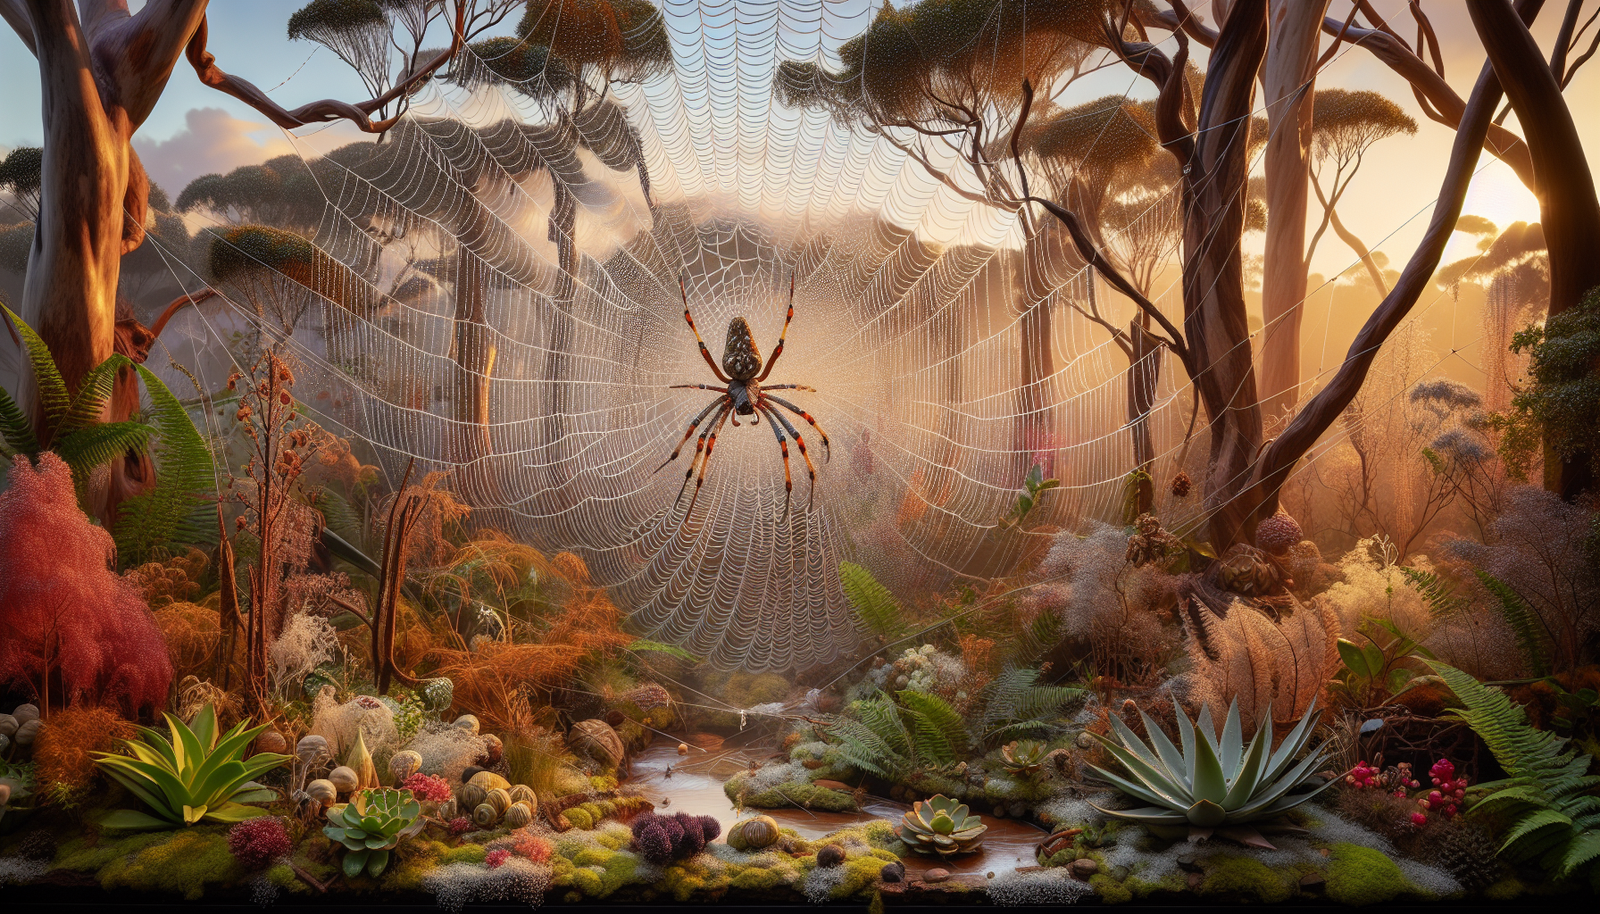 How Do You Replicate The Habitat Of The Australian Net-casting Spider In A Captive Environment?